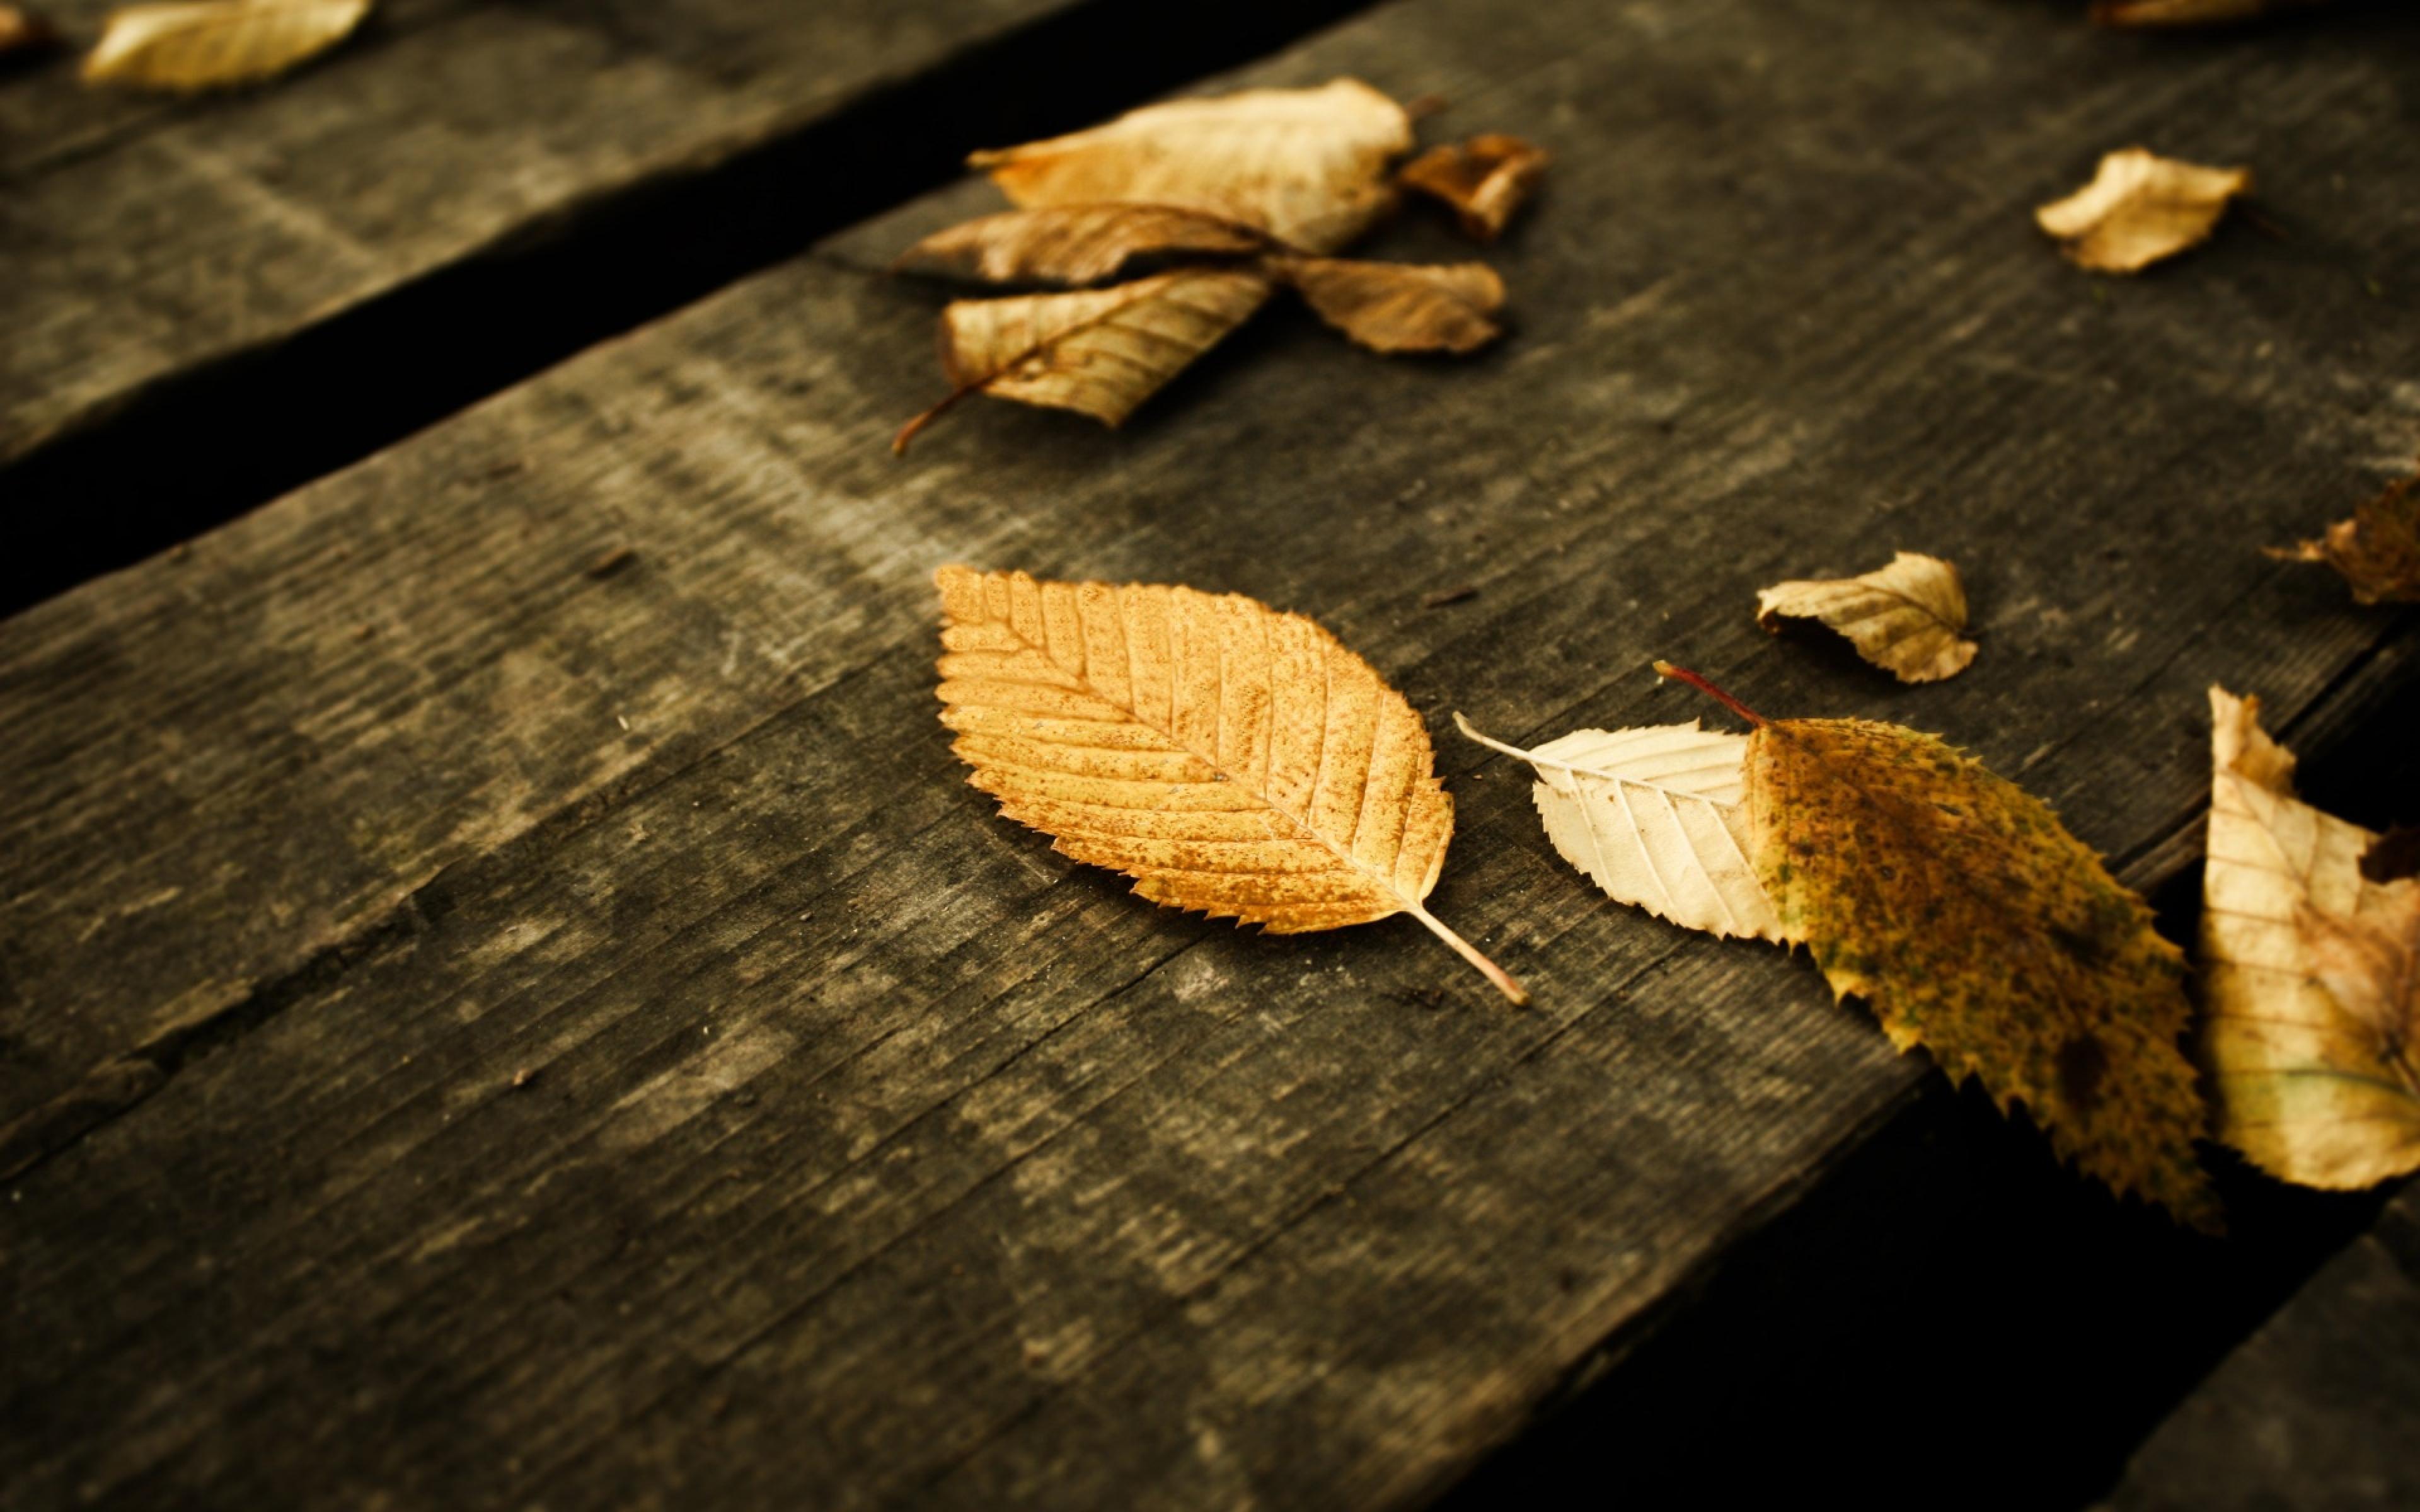 Fallen leaves on wood autumn fall nature wallpaper | nature and ...